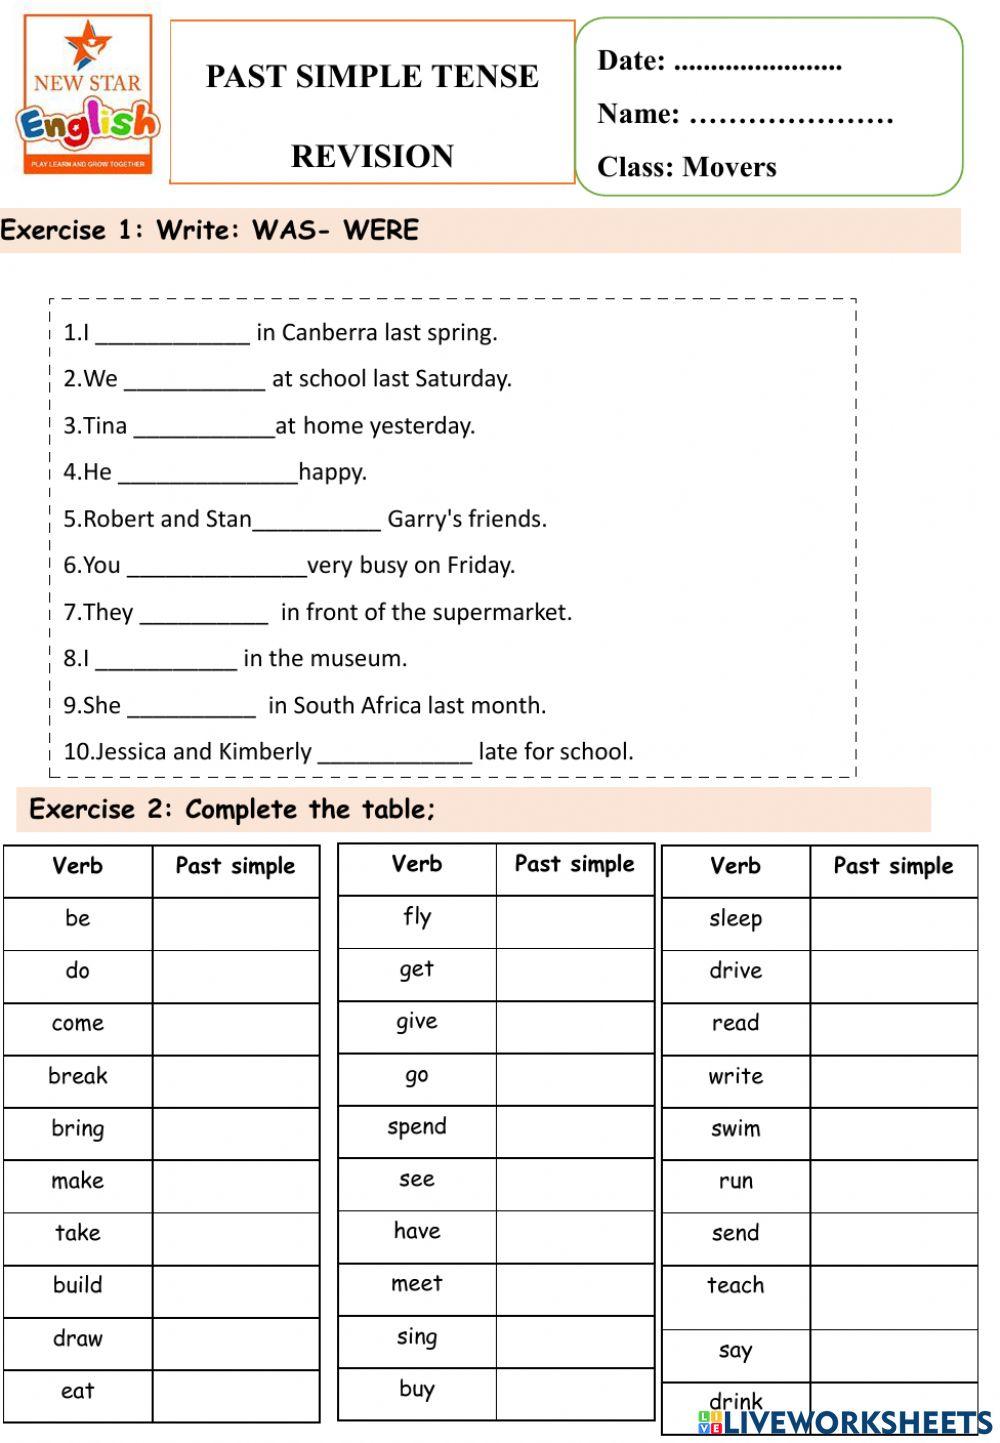 Past simple tense Review 1